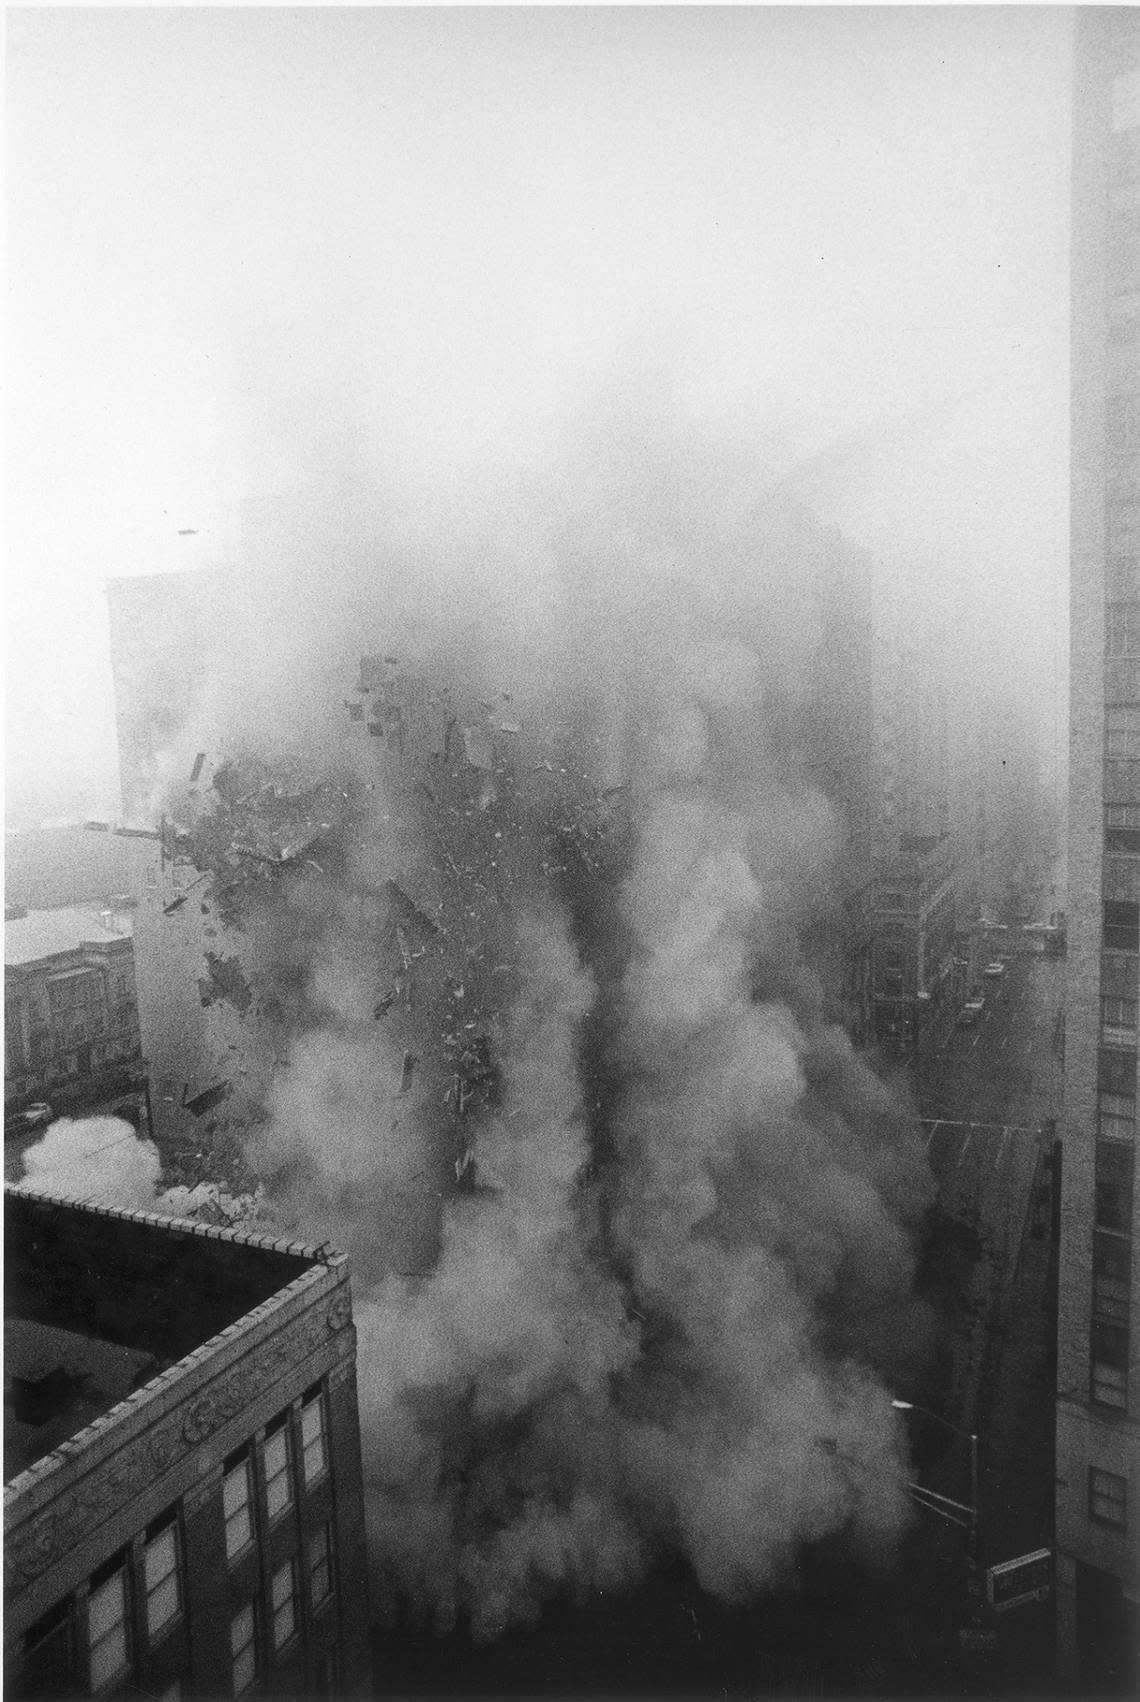 Oct. 29, 1972: Demolition of Worth Hotel, 7th and Taylor streets, Fort Worth